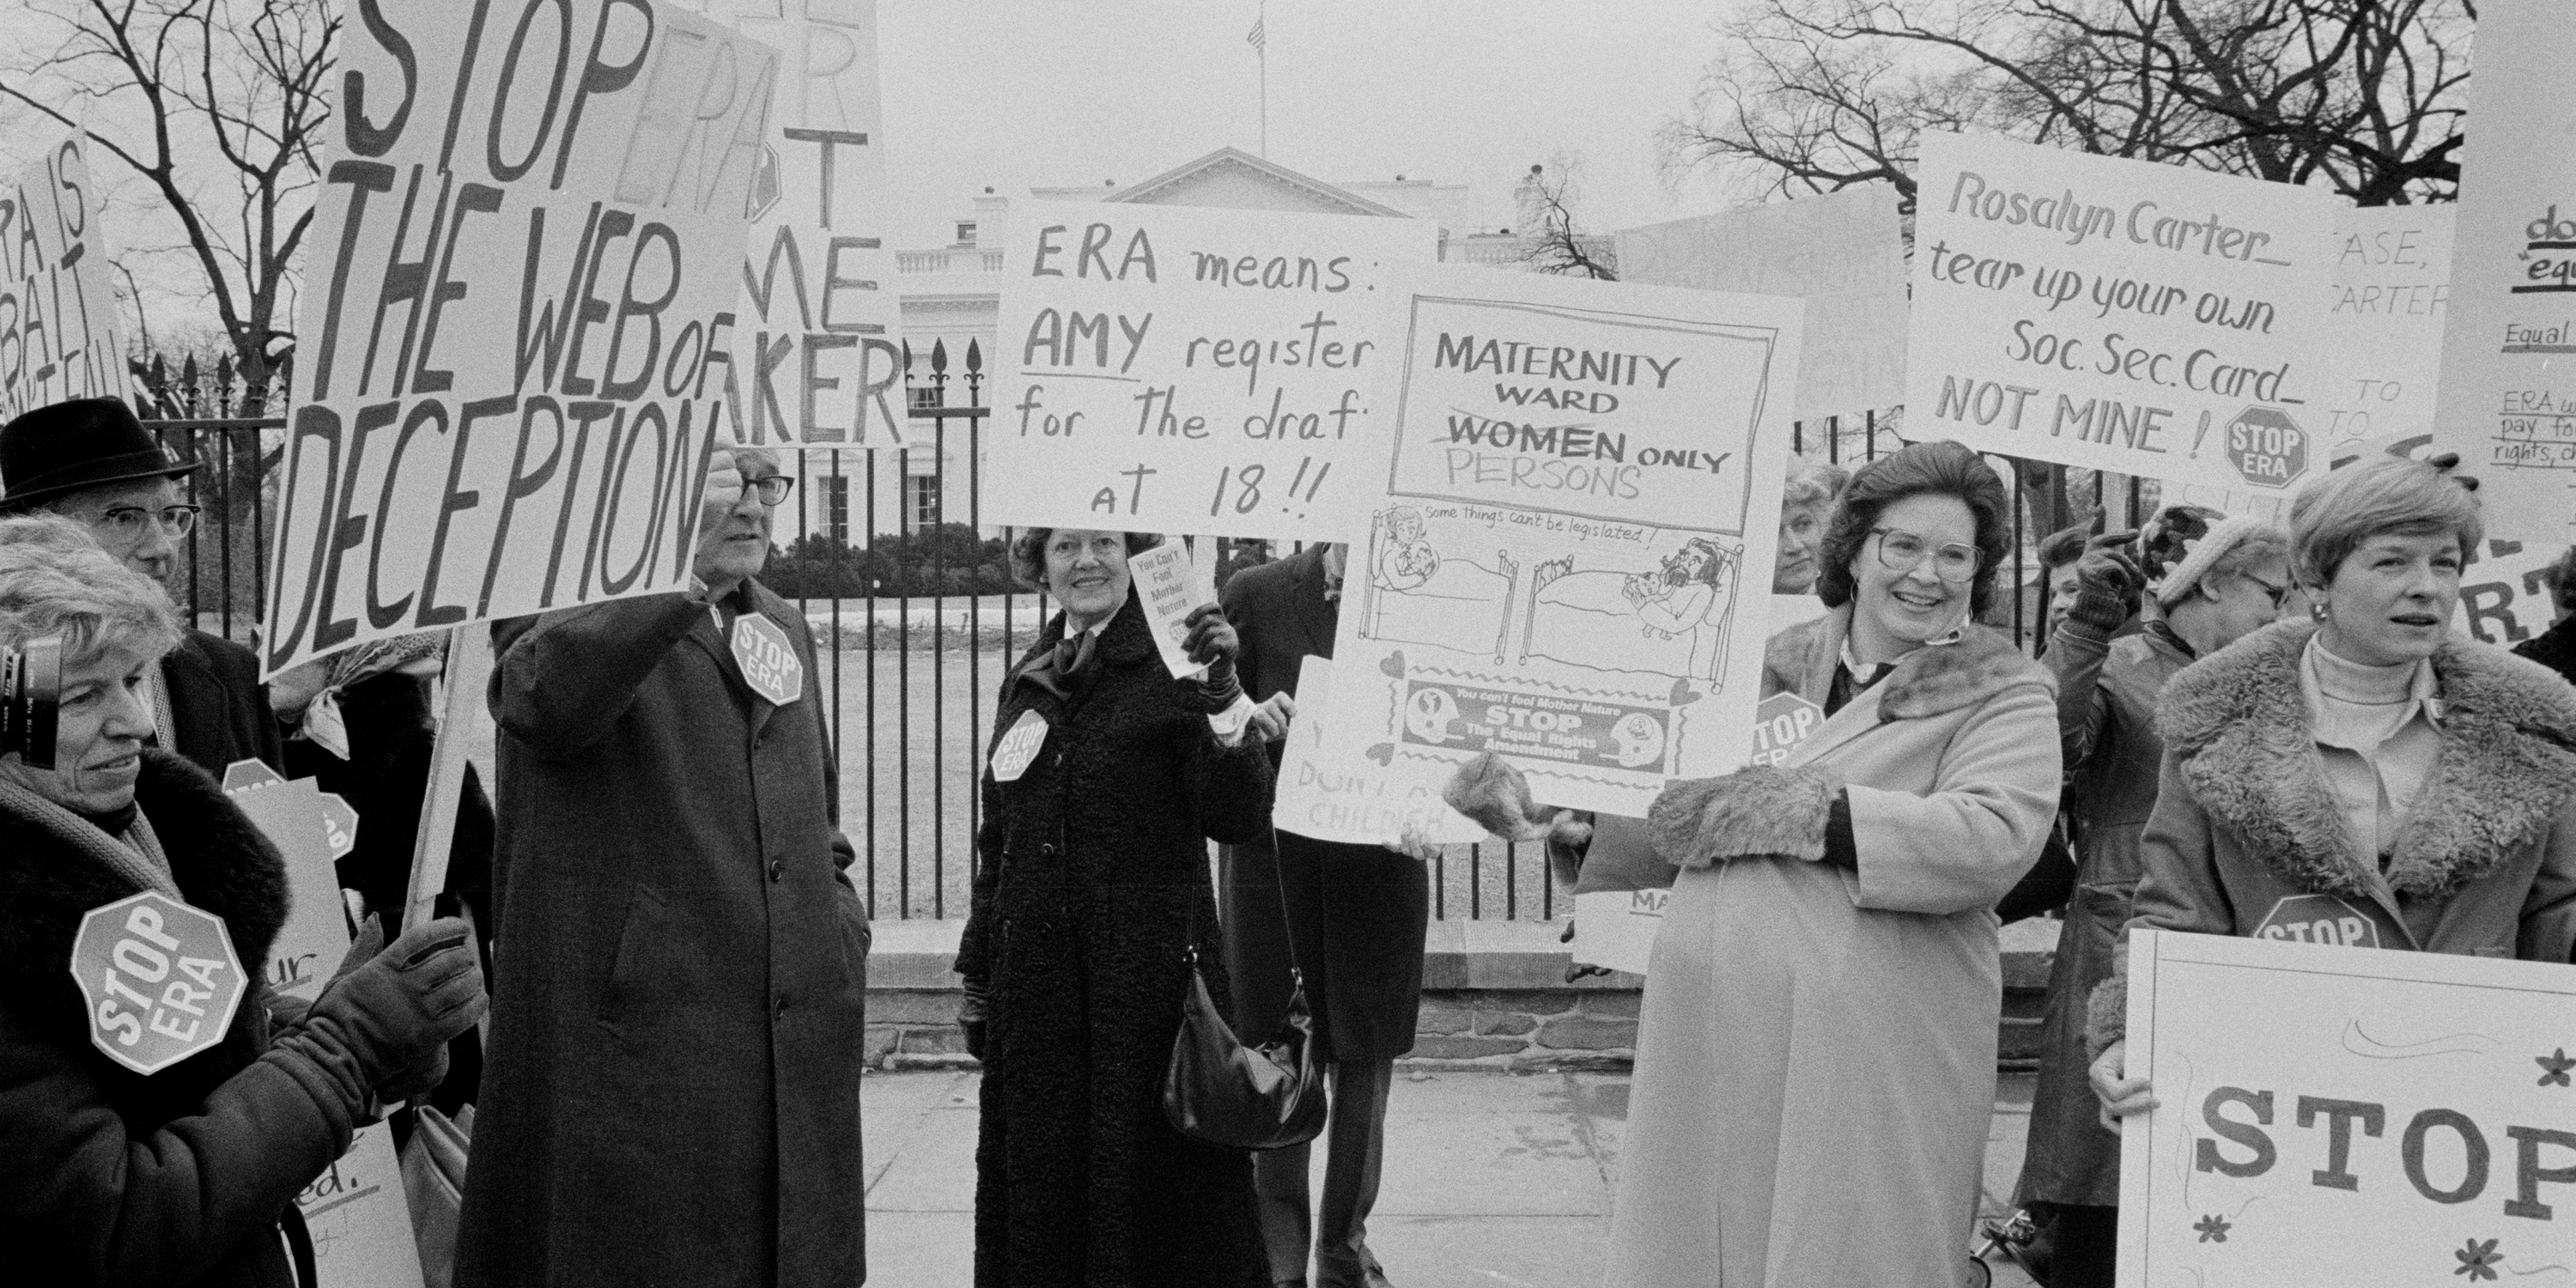 Group of women protesting against the ERA with signs: "Stop the web of deception," "ERA means Amy register for the draft at 18," "Maternity ward - persons only" 